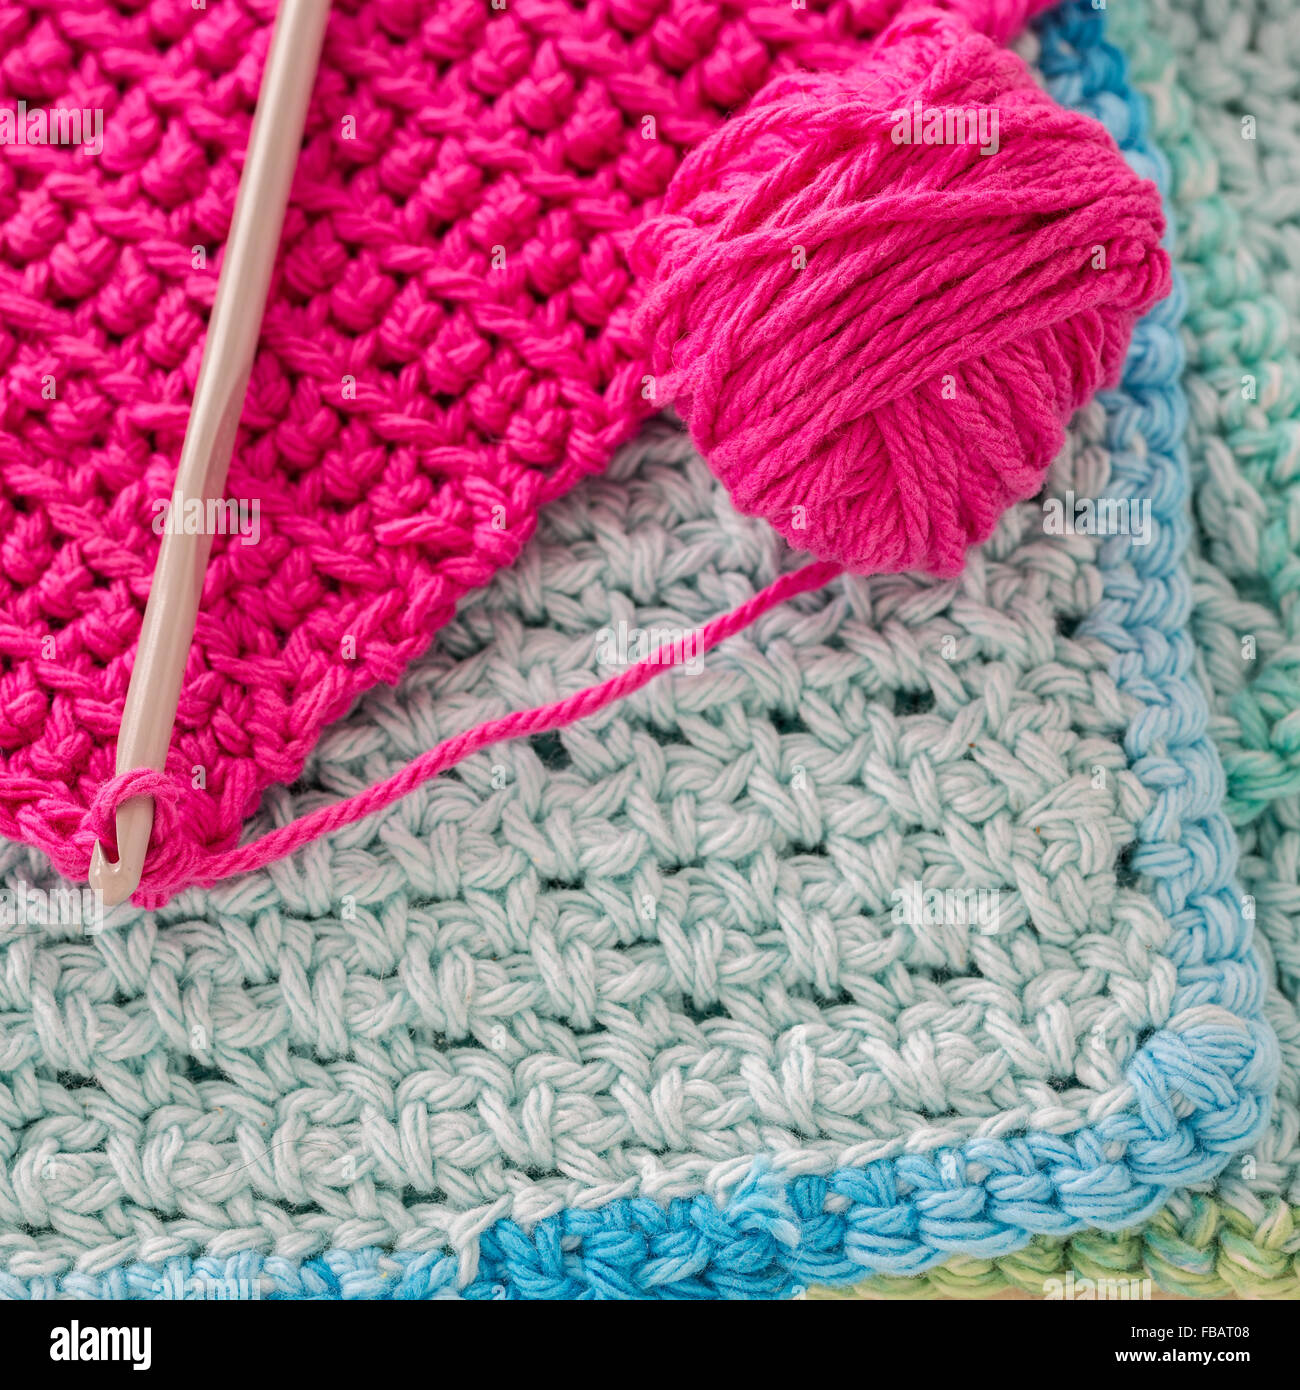 Crocheted dishcloths, with a hook and a ball of yarn. Stock Photo